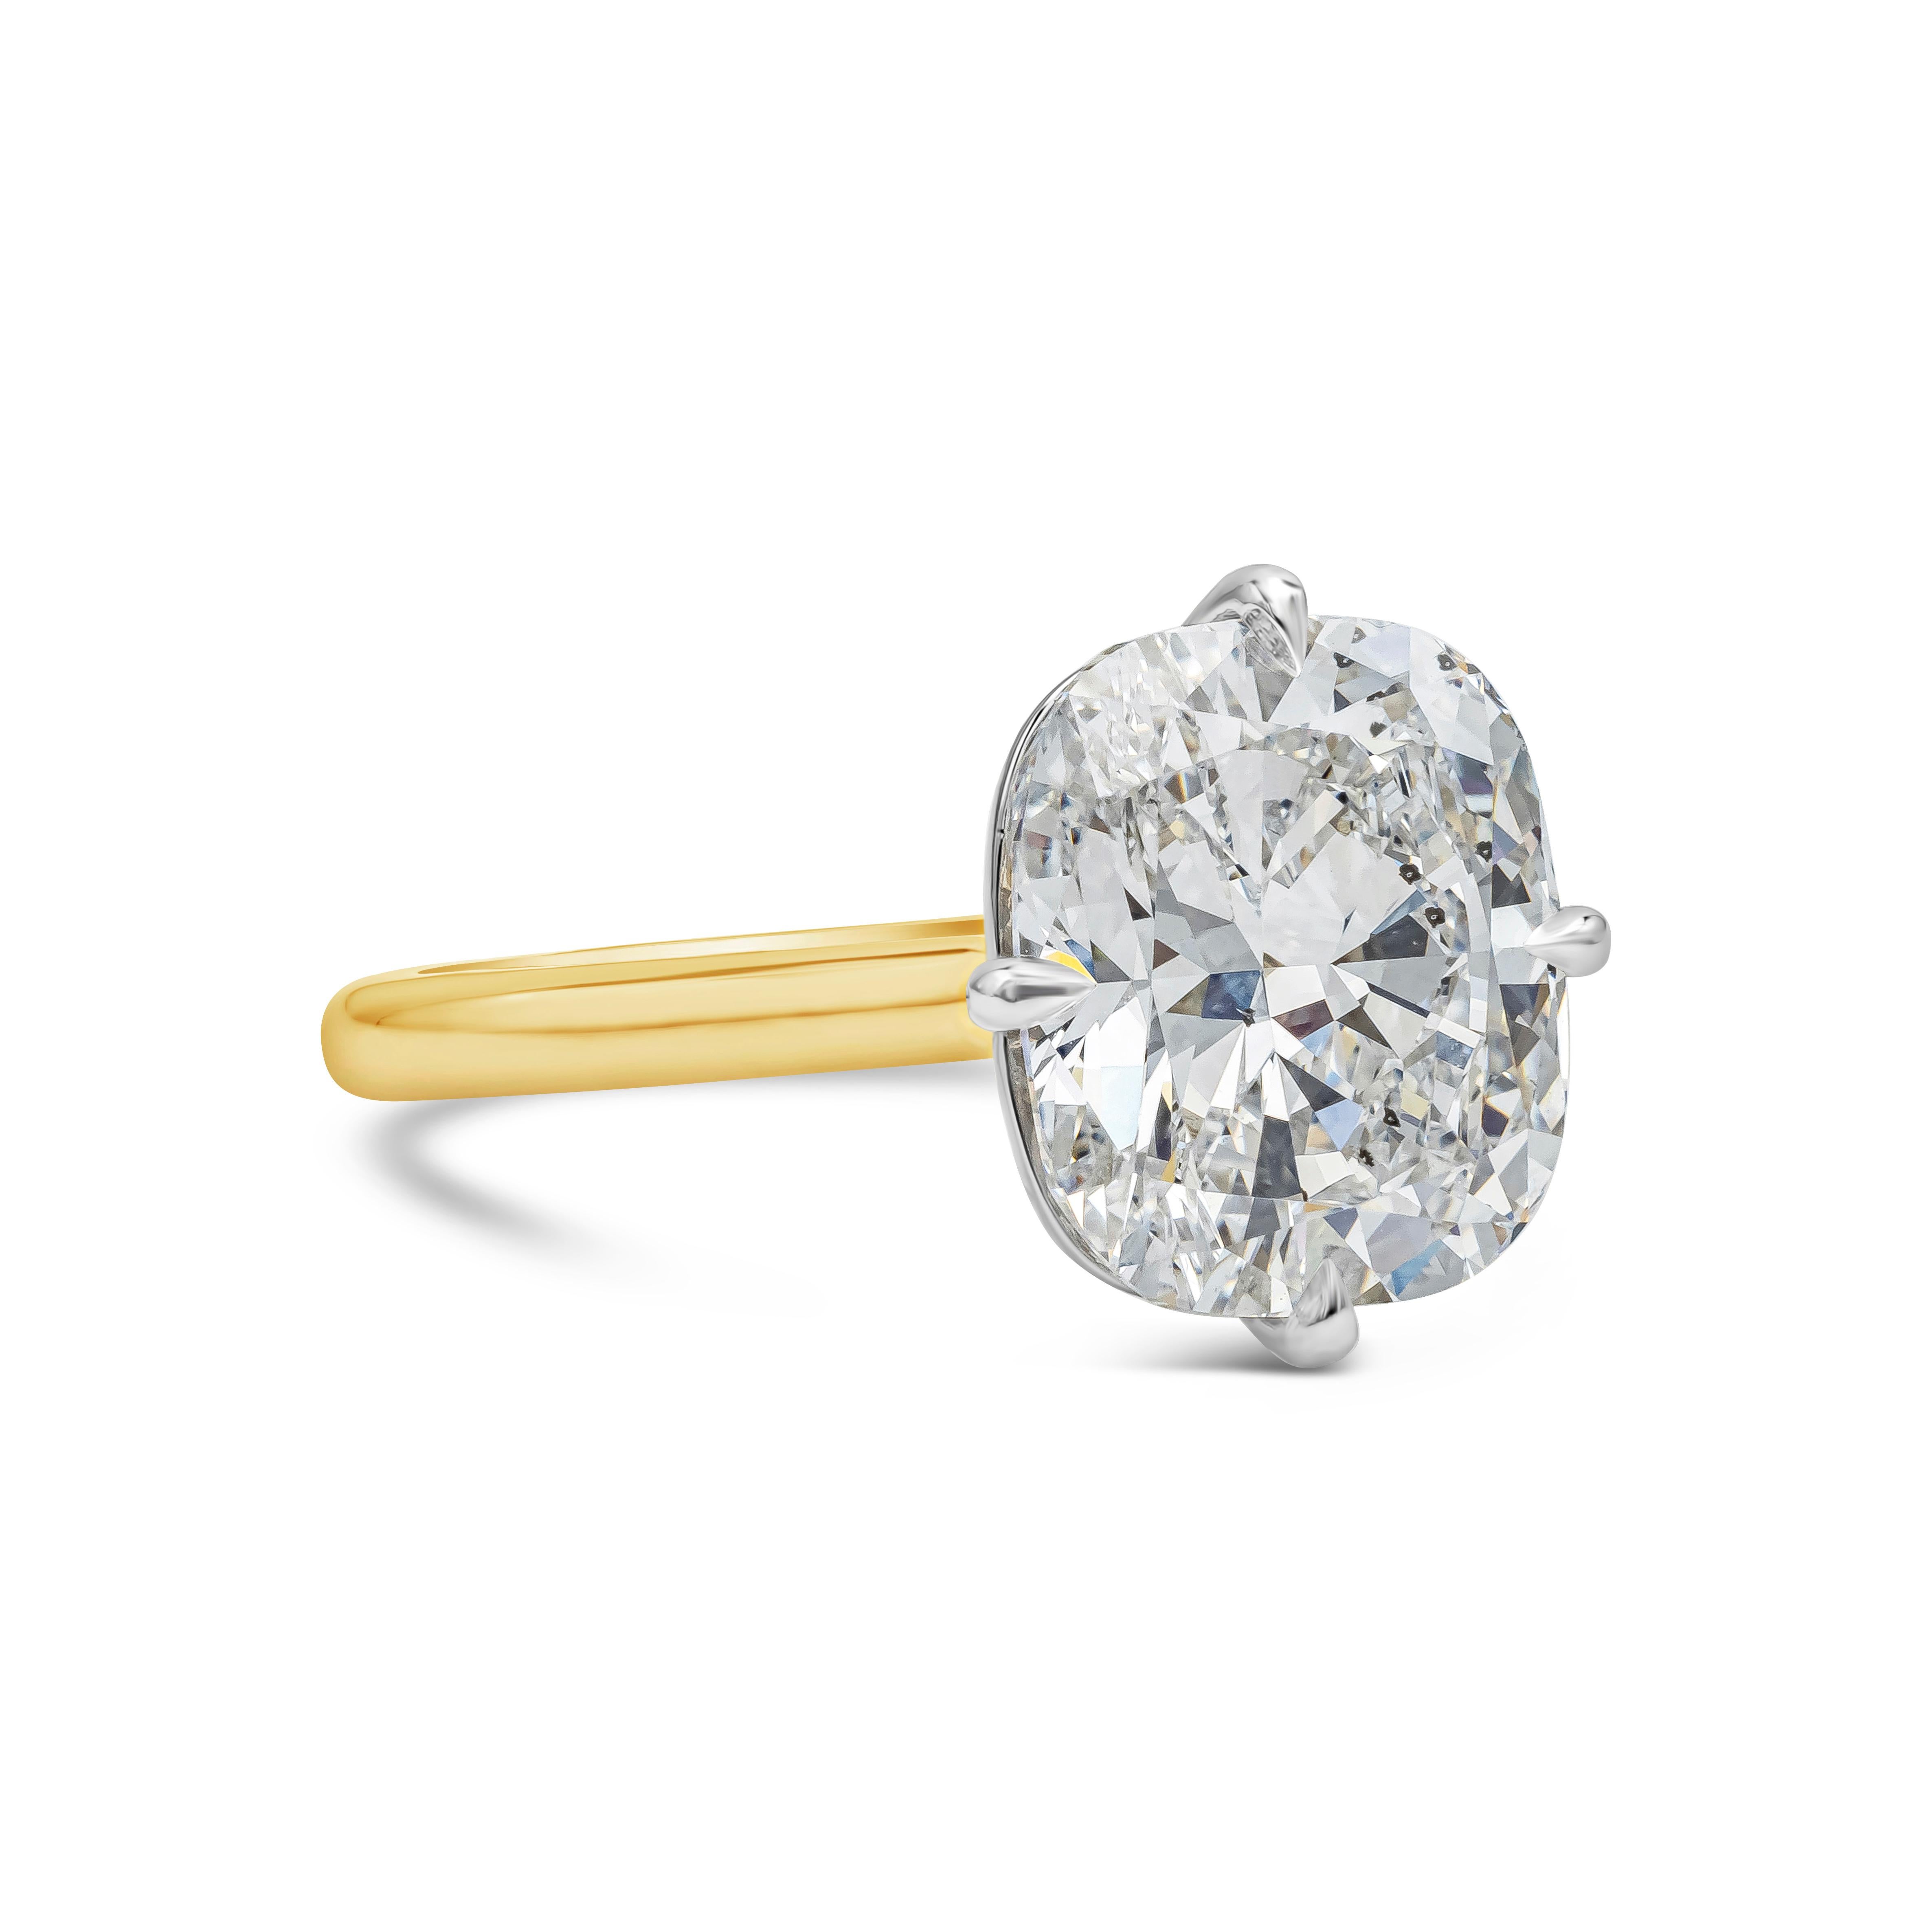 A beautiful engagement ring style showcasing a GIA Certified 5.02 carat cushion cut diamond, D Color and SI2 in Clarity. Set in a unique compass basket made in Platinum. Basket is set in a thin 18K Yellow Gold band. 

Roman Malakov is a custom